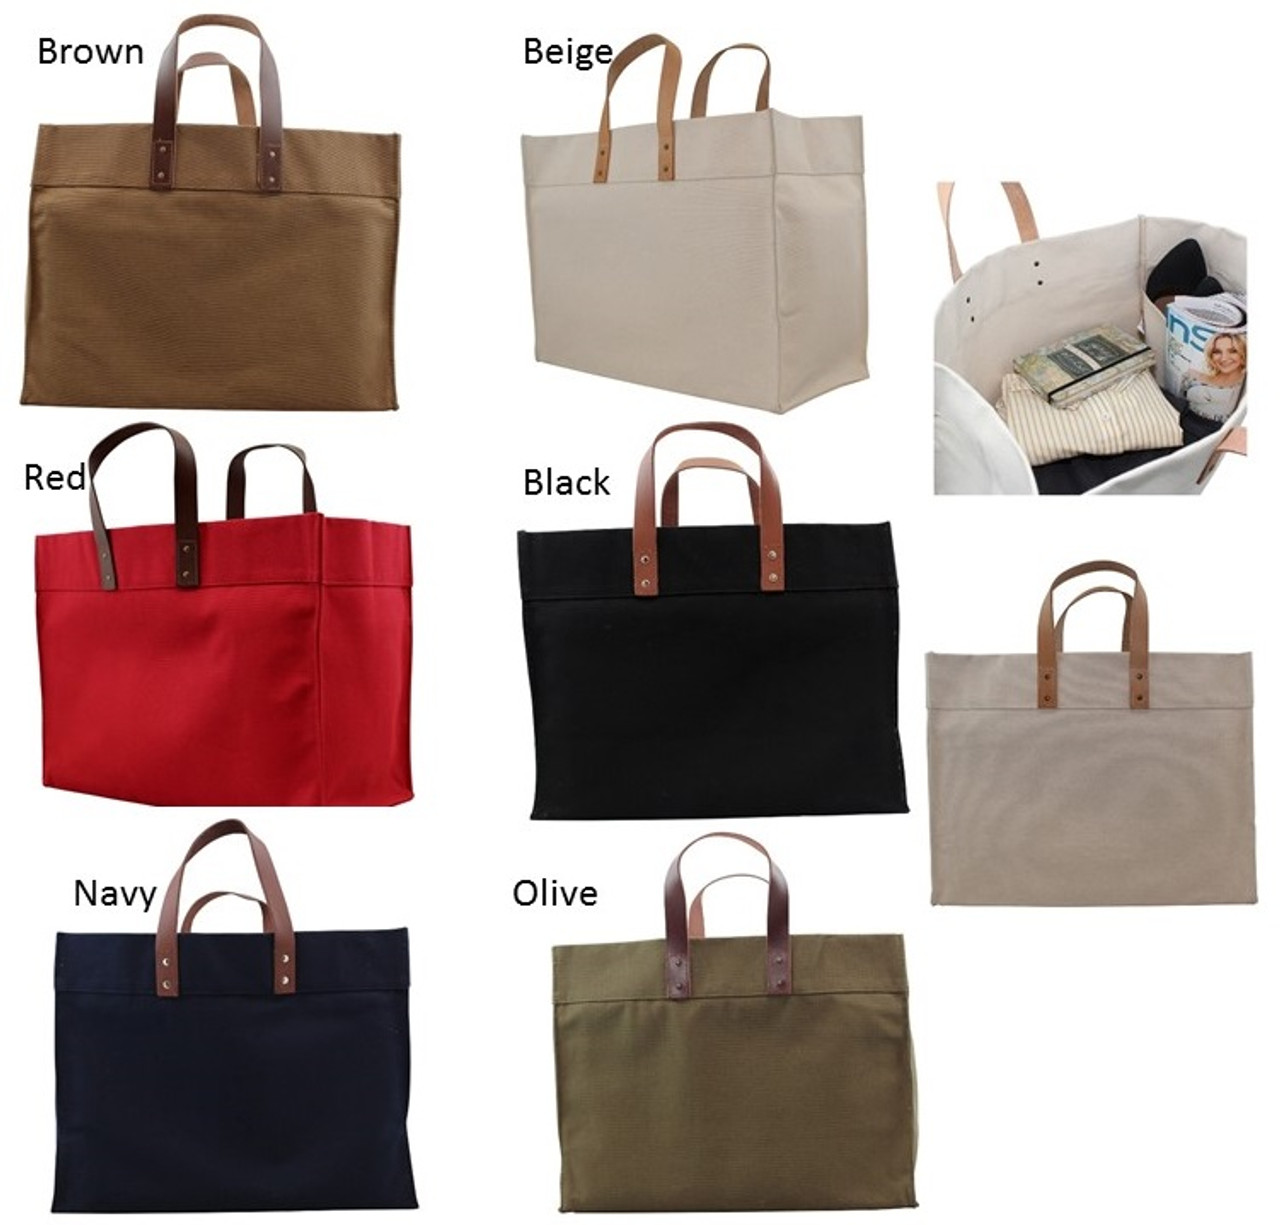 Fulham Single Center Initial Canvas Tote Bag w/ Leather Straps